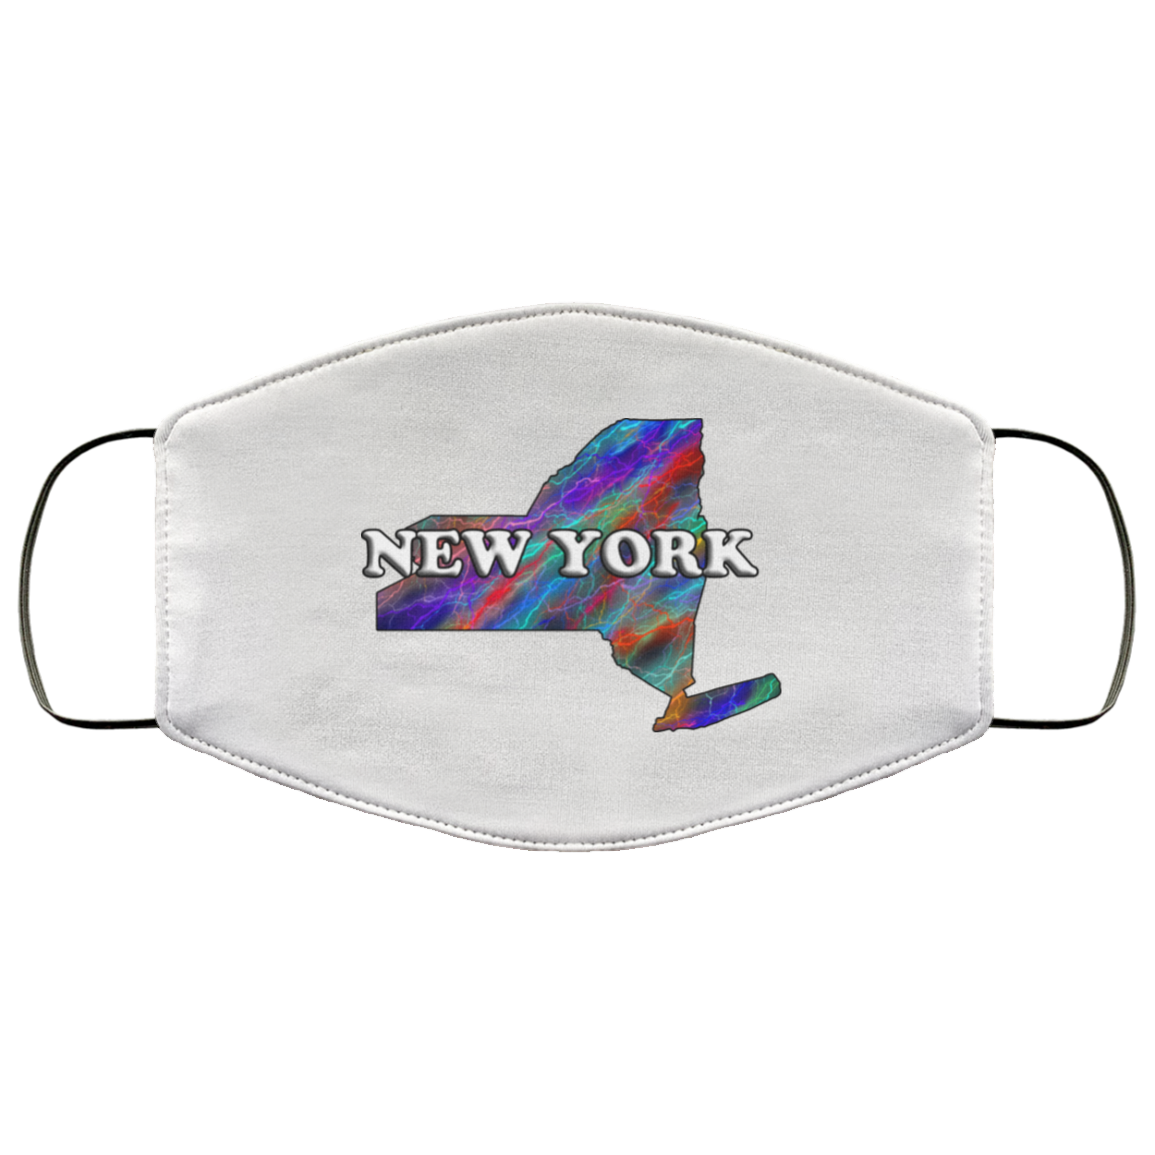 New York Layer Protective Face Mask